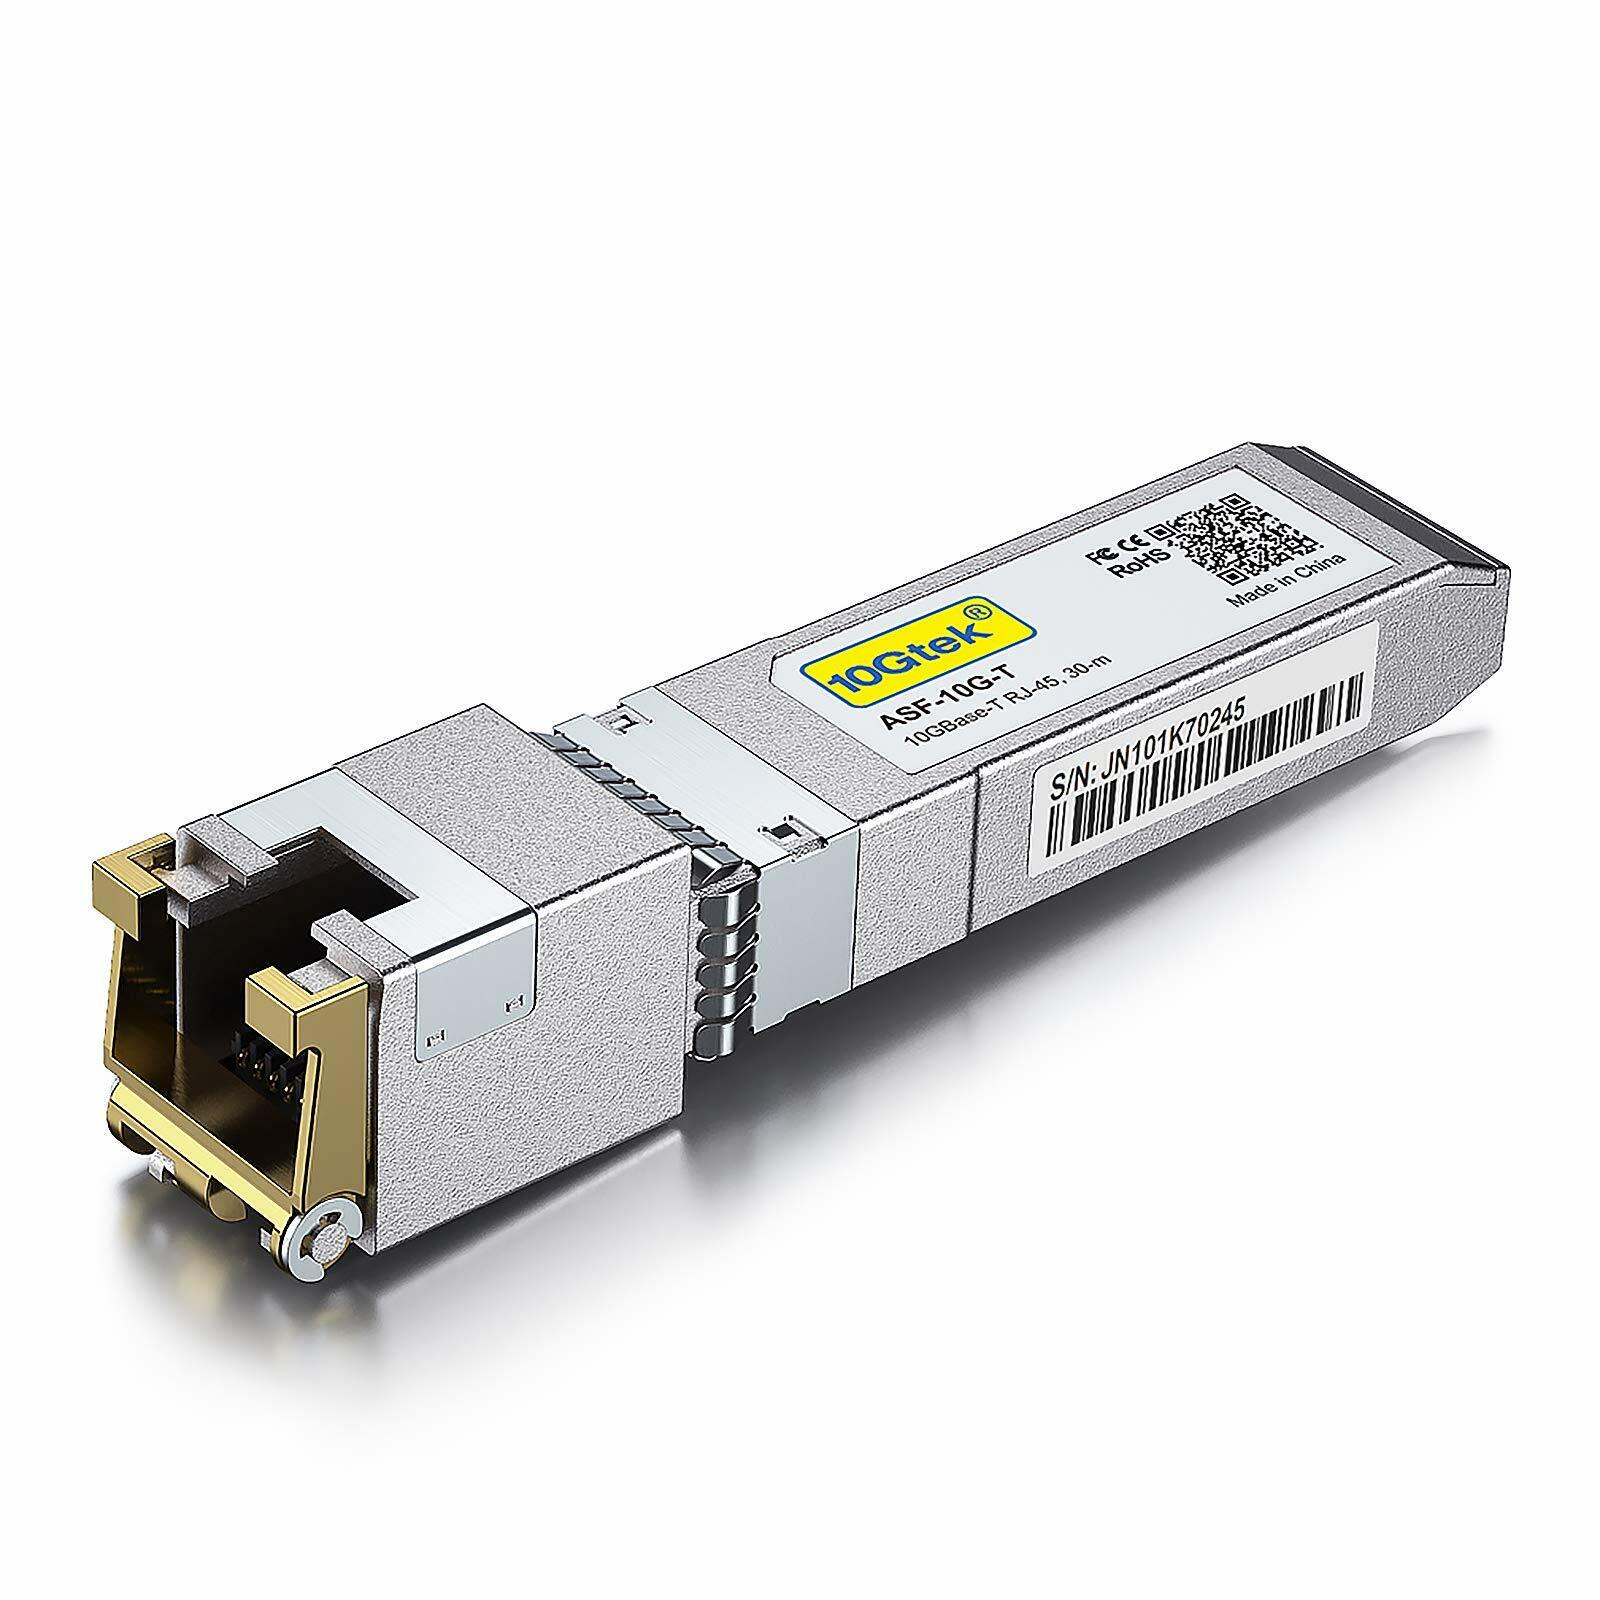 Fully Compatibility 10GBase-T Transceiver SFP-10G-T 10G SFP+ to RJ45 Copper 30M